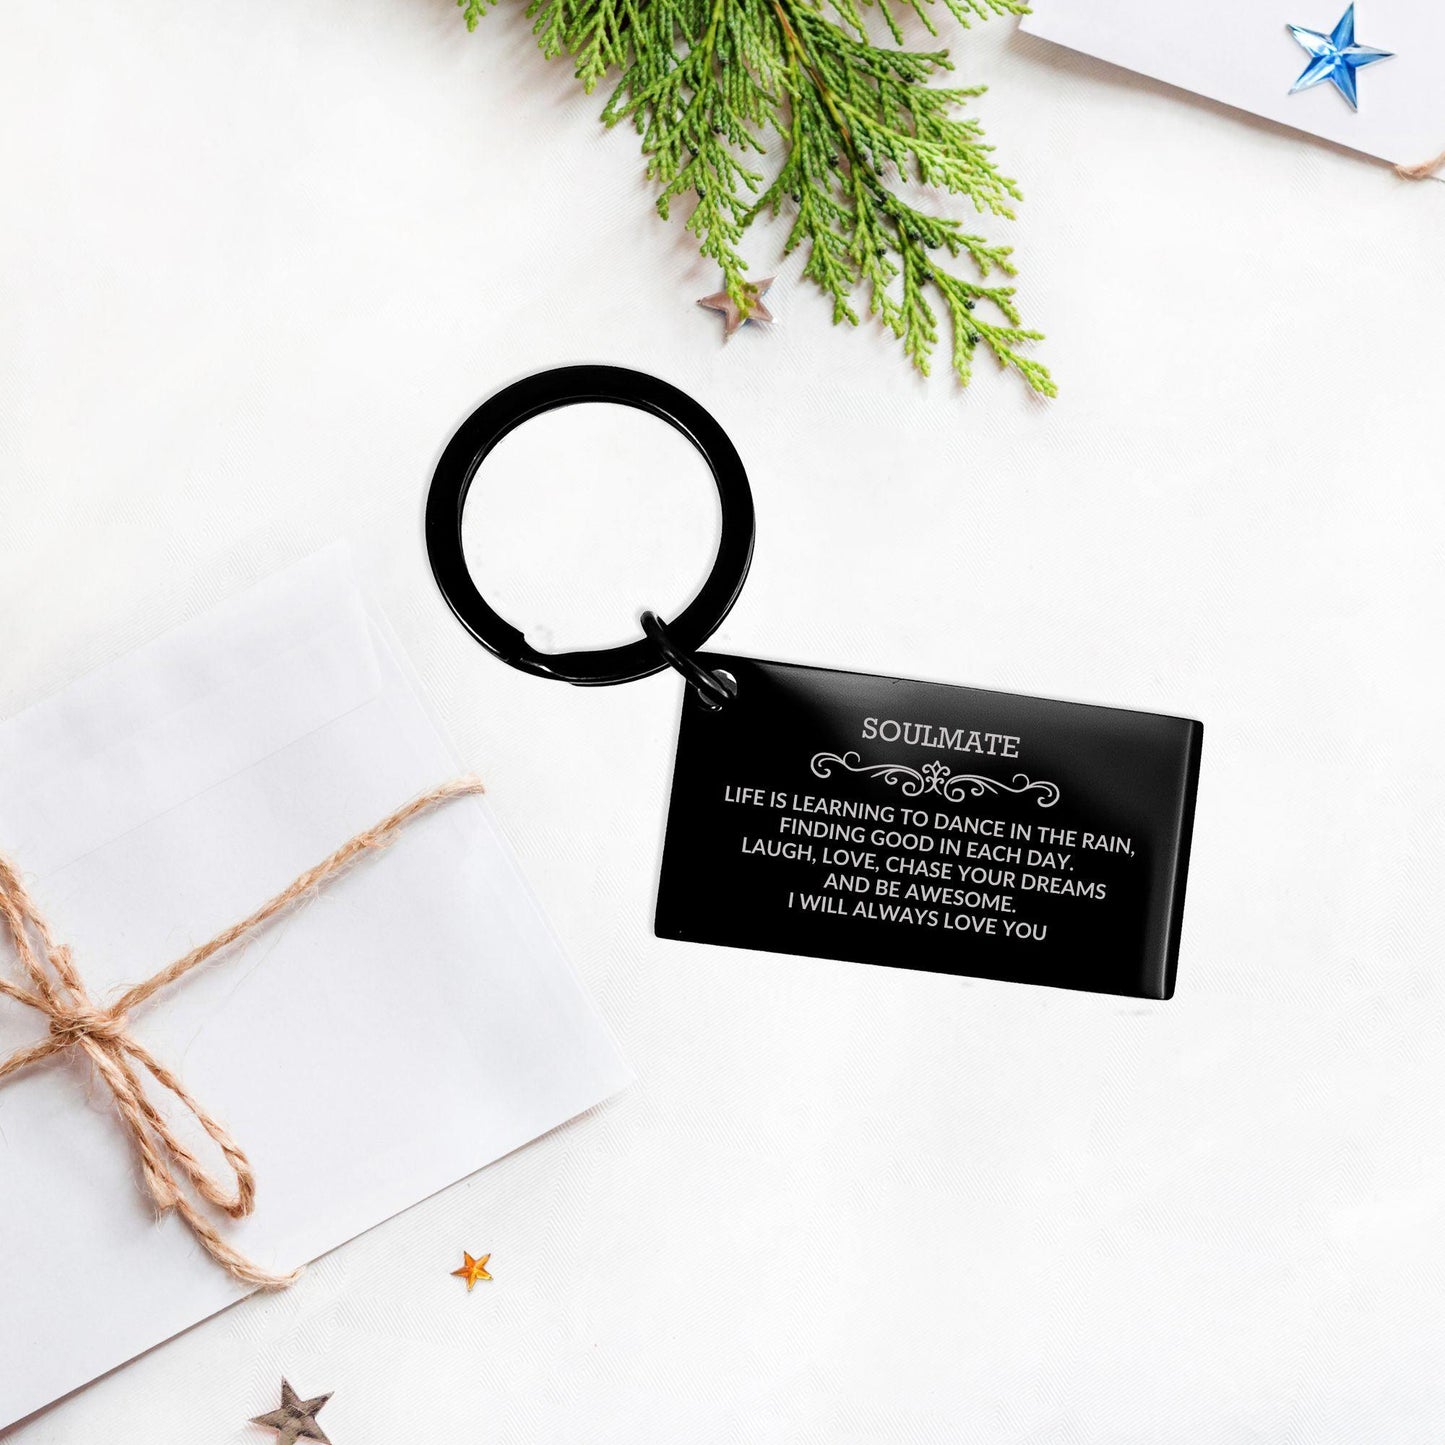 Heartfelt Soulmate Black Engraved Keychain - Life is Learning to Dance in the Rain, I'm always with you - Birthday, Christmas Holiday Gifts - Mallard Moon Gift Shop